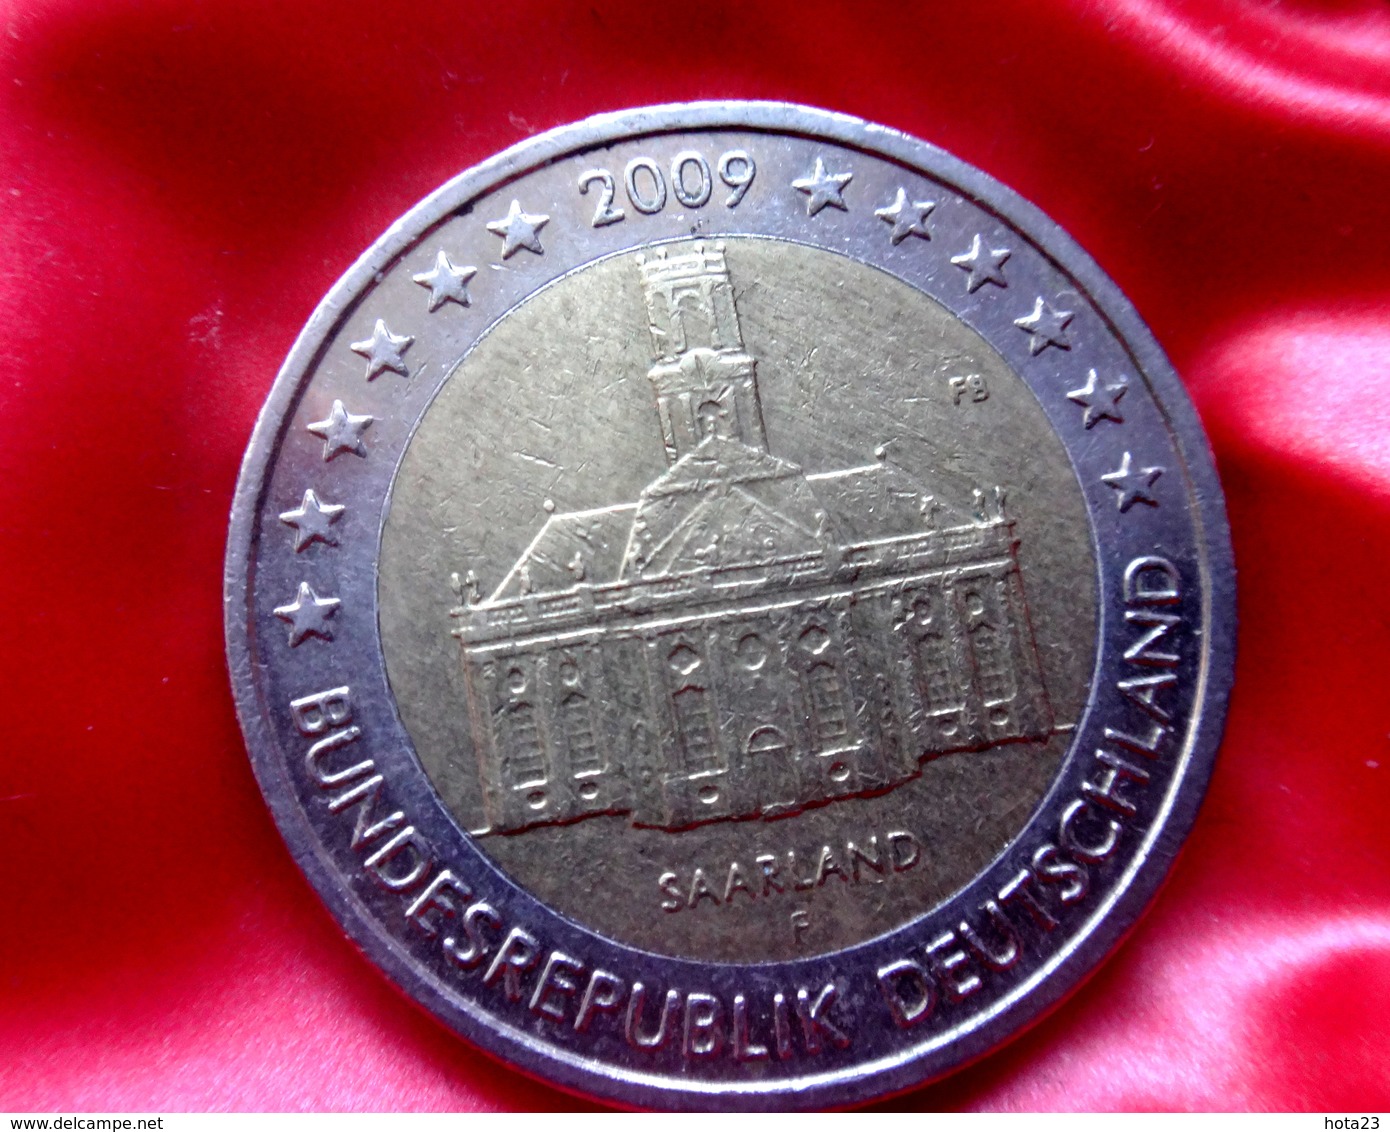 Germany 2 Euro -  F -  Coin 2009  Saarland " Ludwigskirche " Coin CIRCULATED - Germany